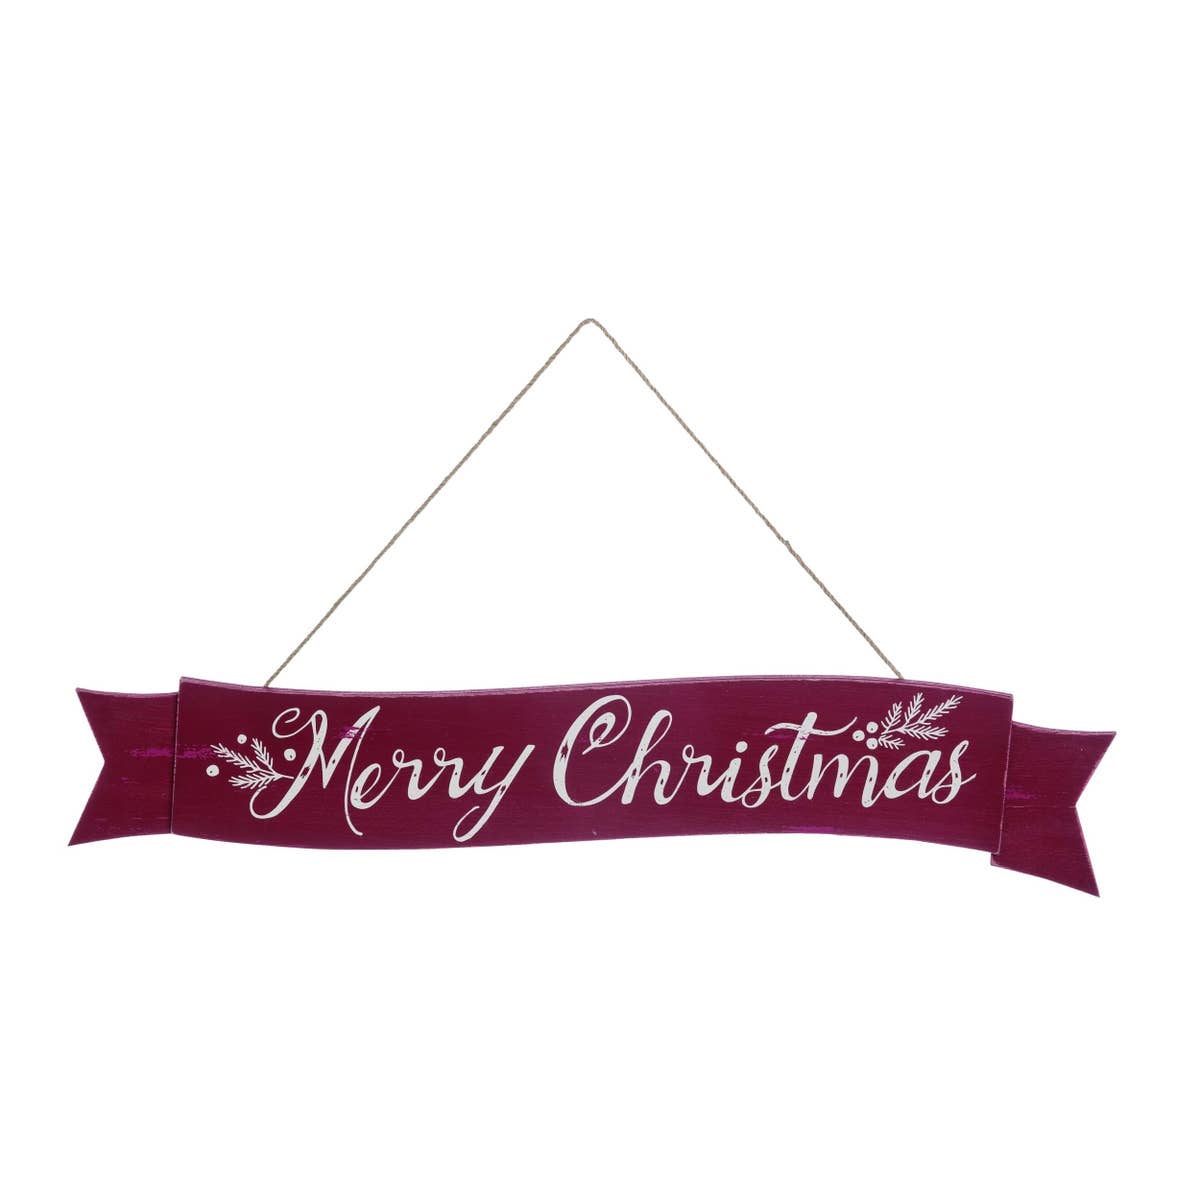 Christmas Decor on Wall - Wooden Christmas Banner. Red wooden sign with white script font reading "Merry Christmas".